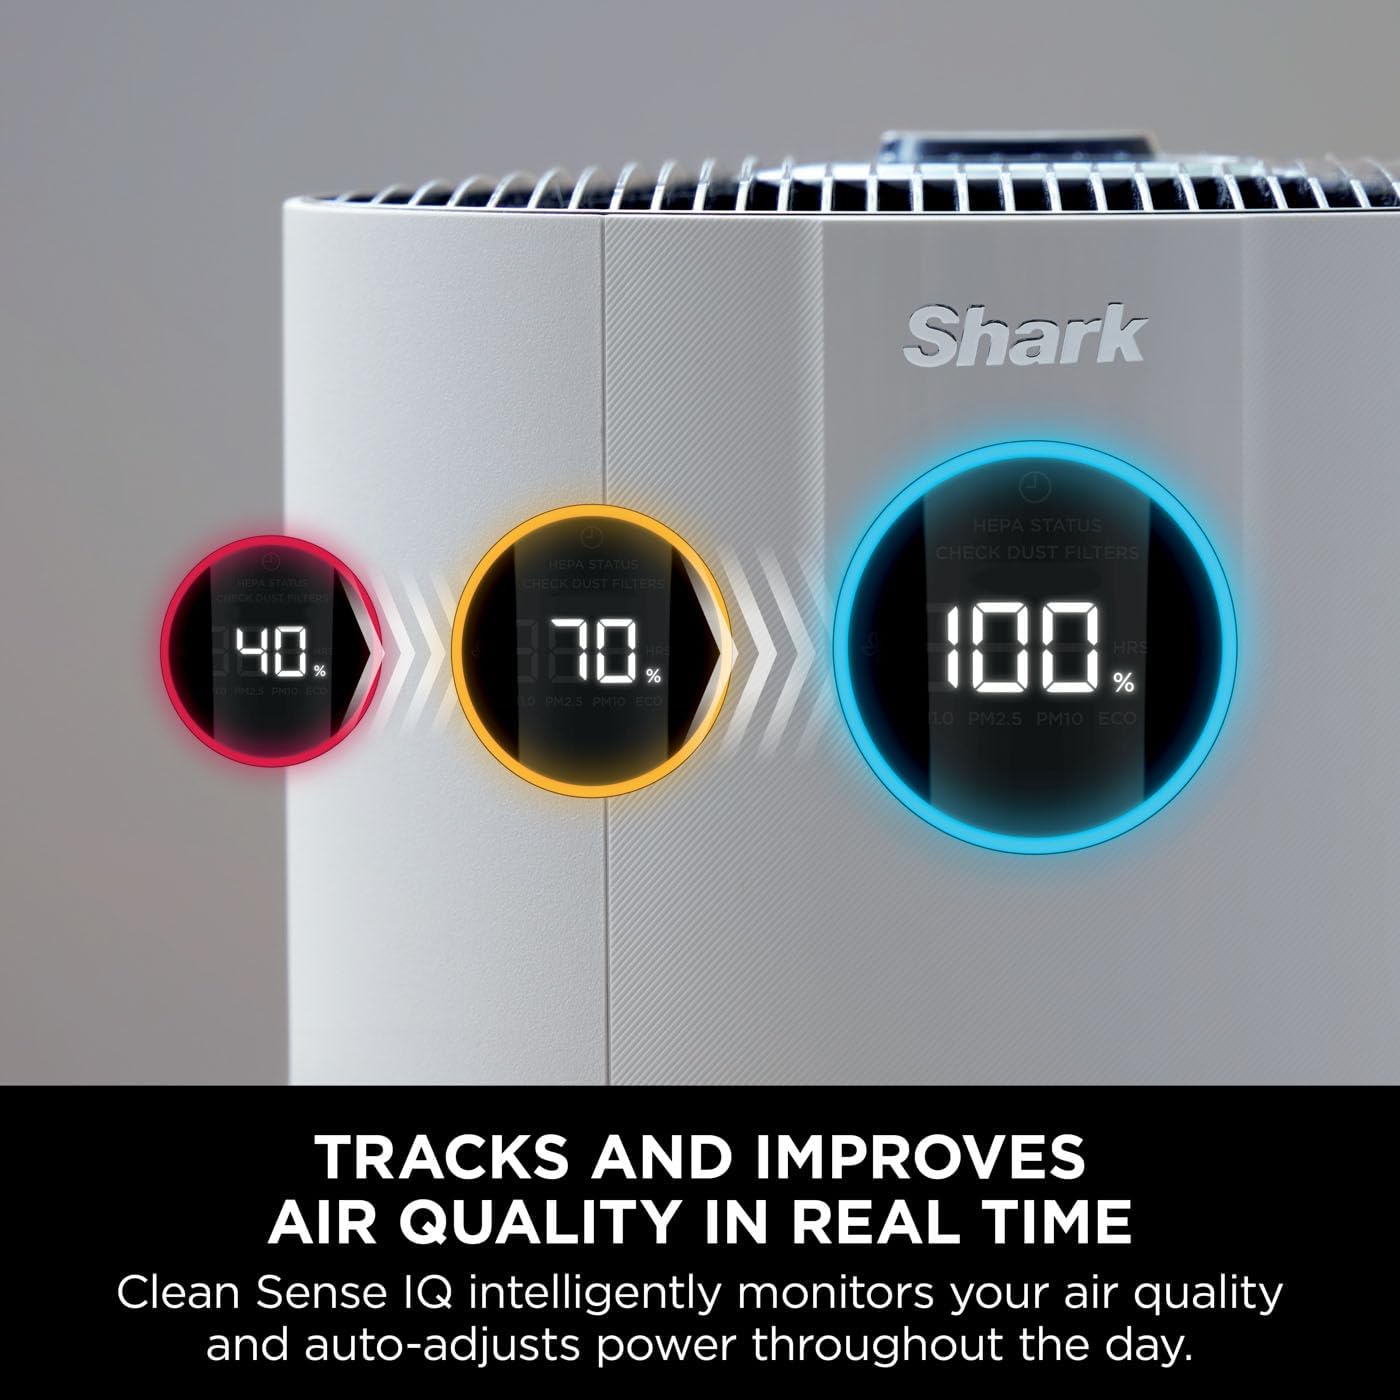 Shark NeverChange5 Air Purifier MAX for Home, Large Room Coverage 130sqm, 5 - Year HEPA Filter Traps 99.97% of Allergens including Dust, Pollen, Pet Dander, Auto Mode, Quiet, LED Display, White HP300UK - Amazing Gadgets Outlet